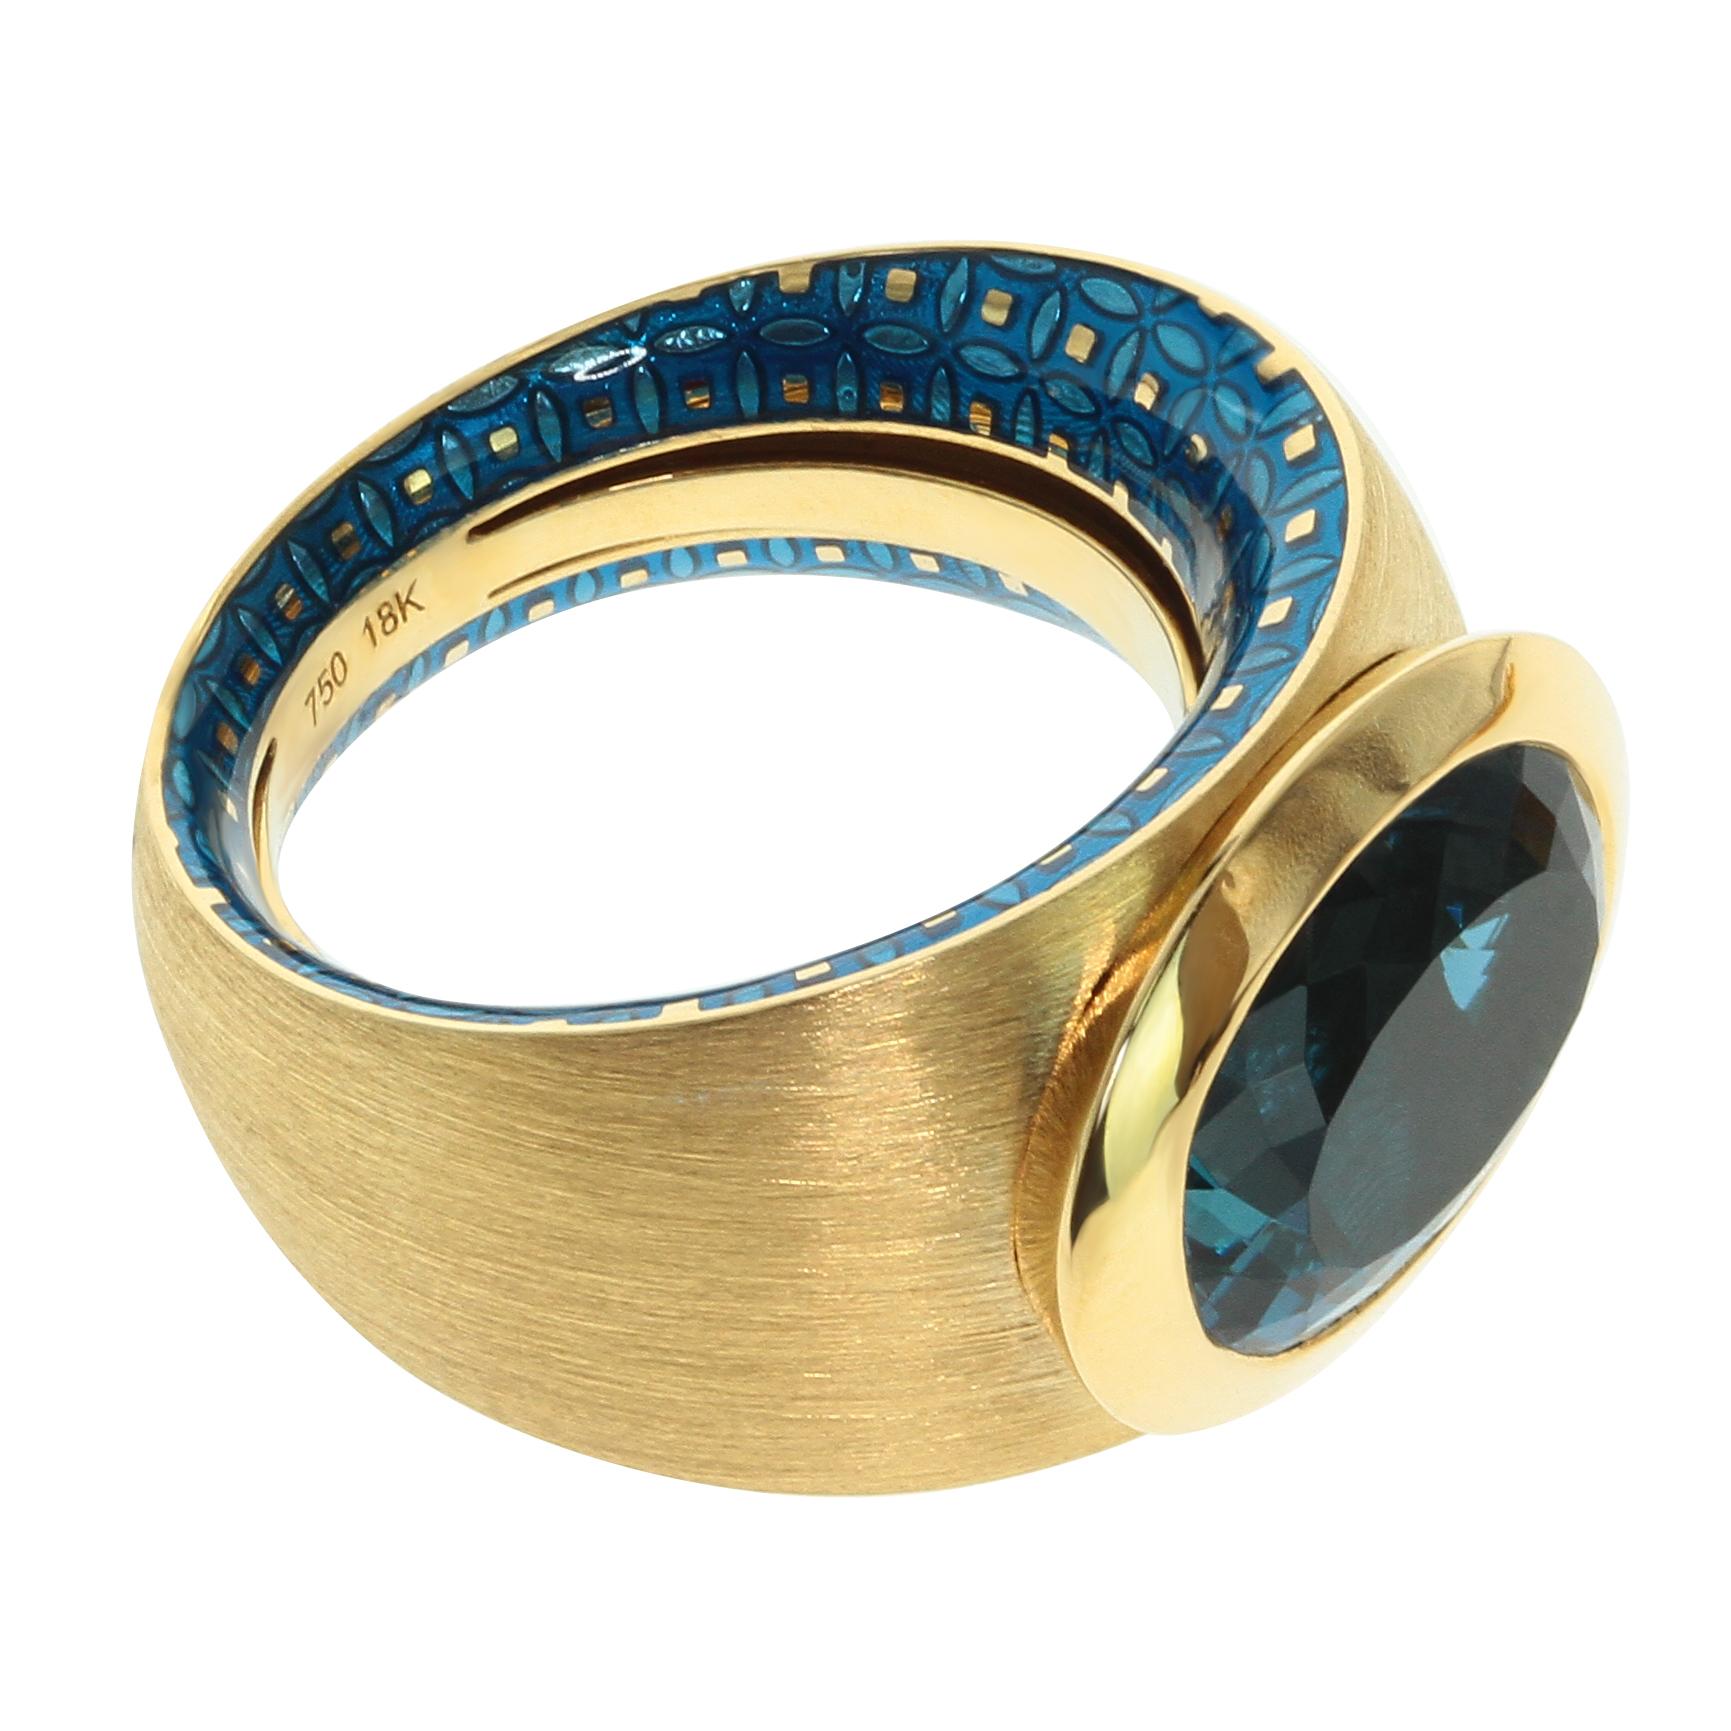 Blue Topaz Colored Enamel 18 Karat Yellow Gold Kaleidoscope Ring

Please take a look at one of our trade mark texture in Kaleidoscope Collection - 